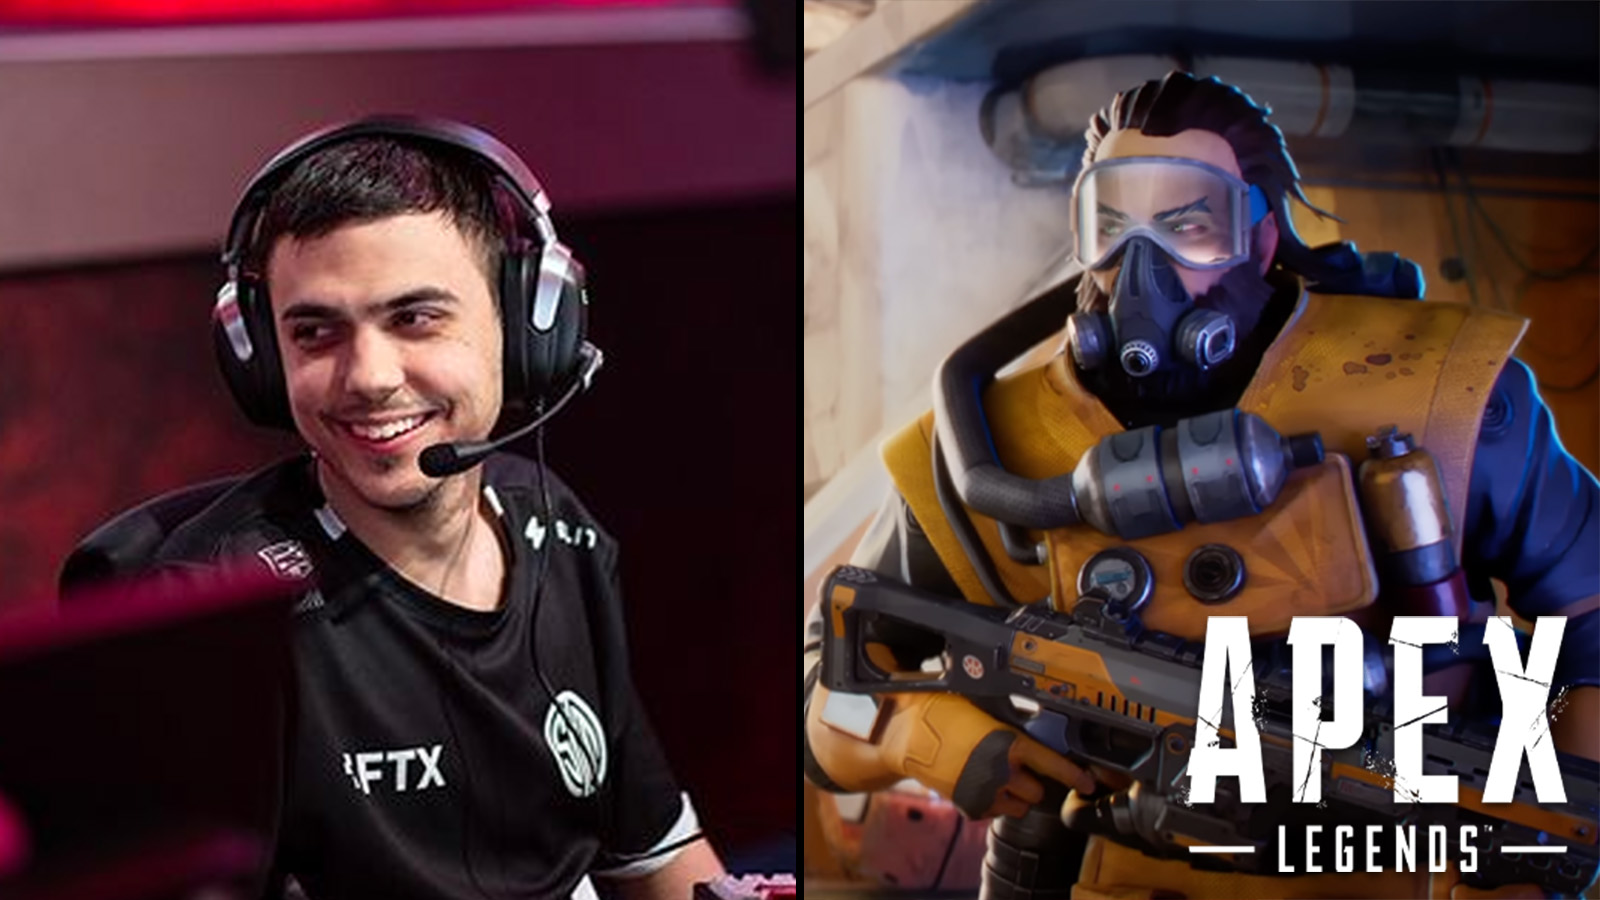 ImperialHal defends TSM’s conduct amid Apex Legends “information mining” controversy – Egaxo